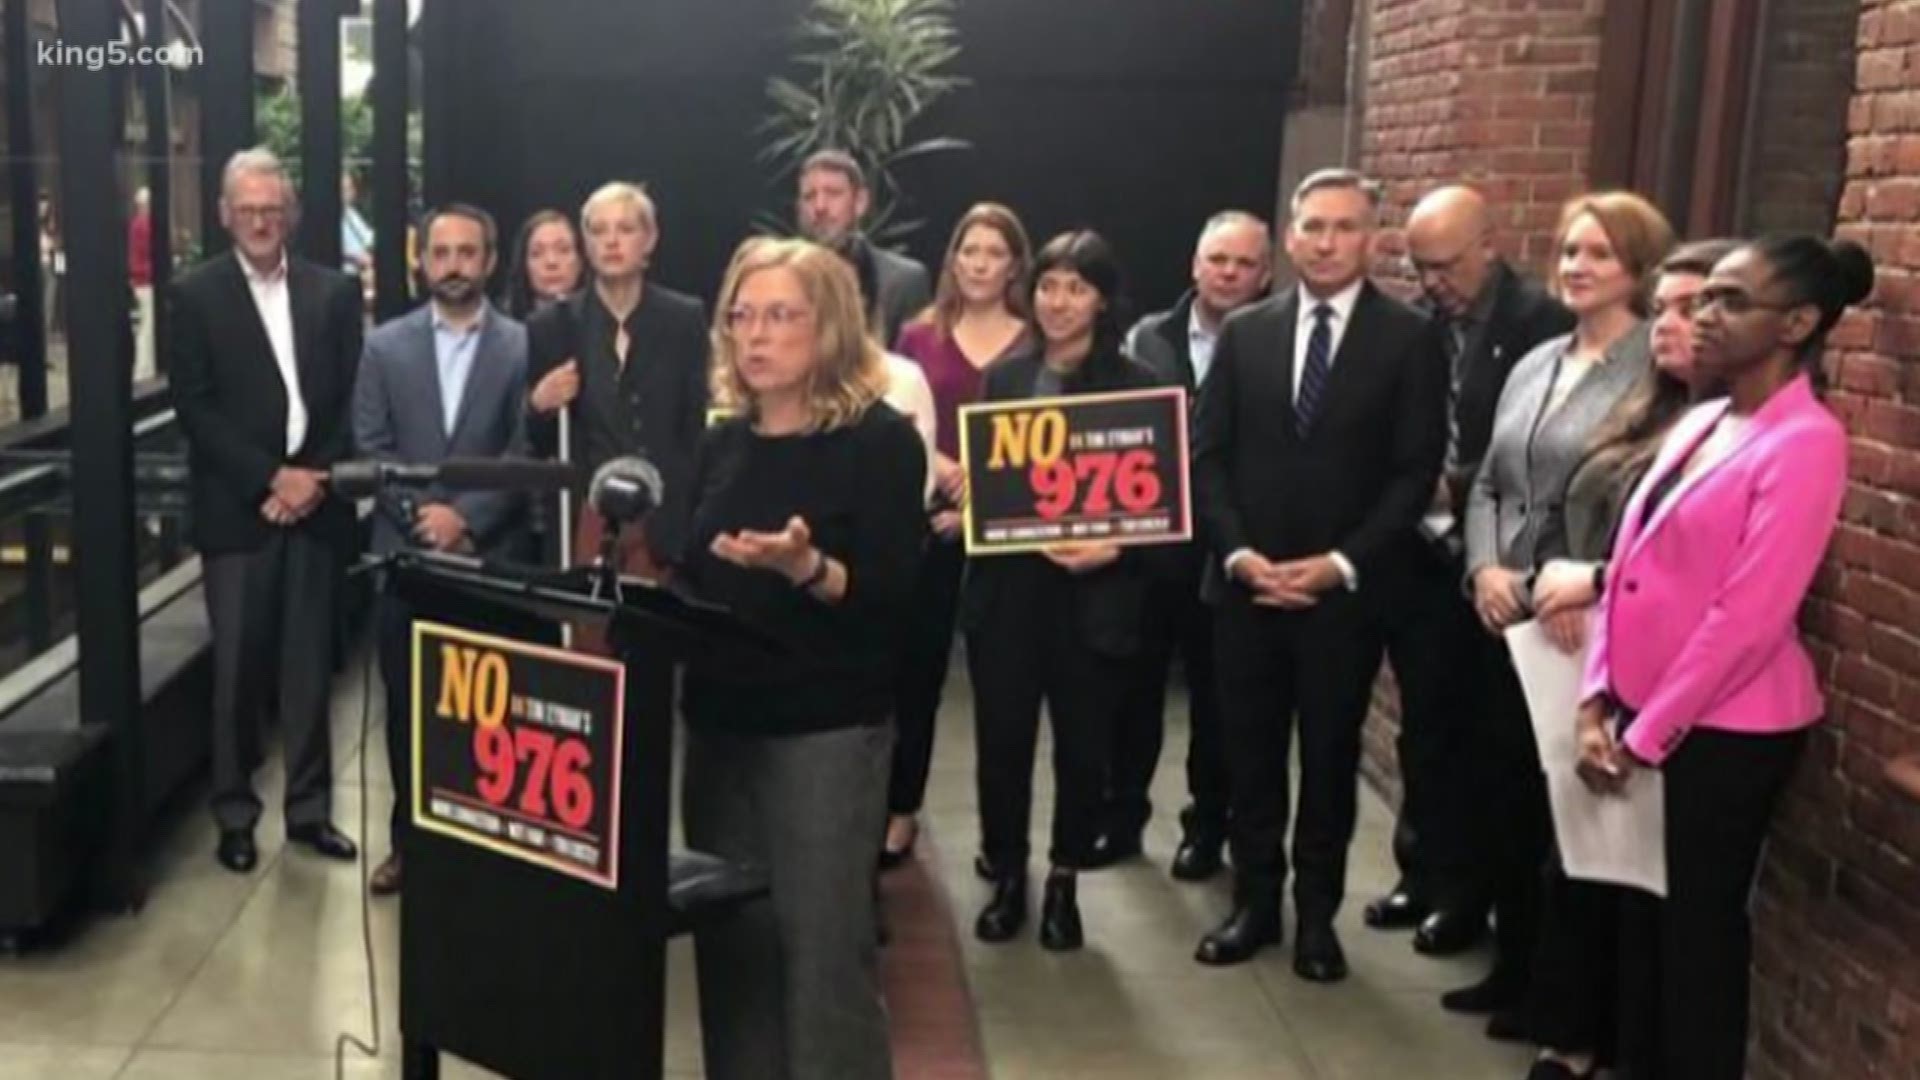 Mayor Jenny Durkan & King County Executive Dow Constantine warn I-976, which seeks to cap cartabs at $30, would be catastrophic for the region’s transportation plans